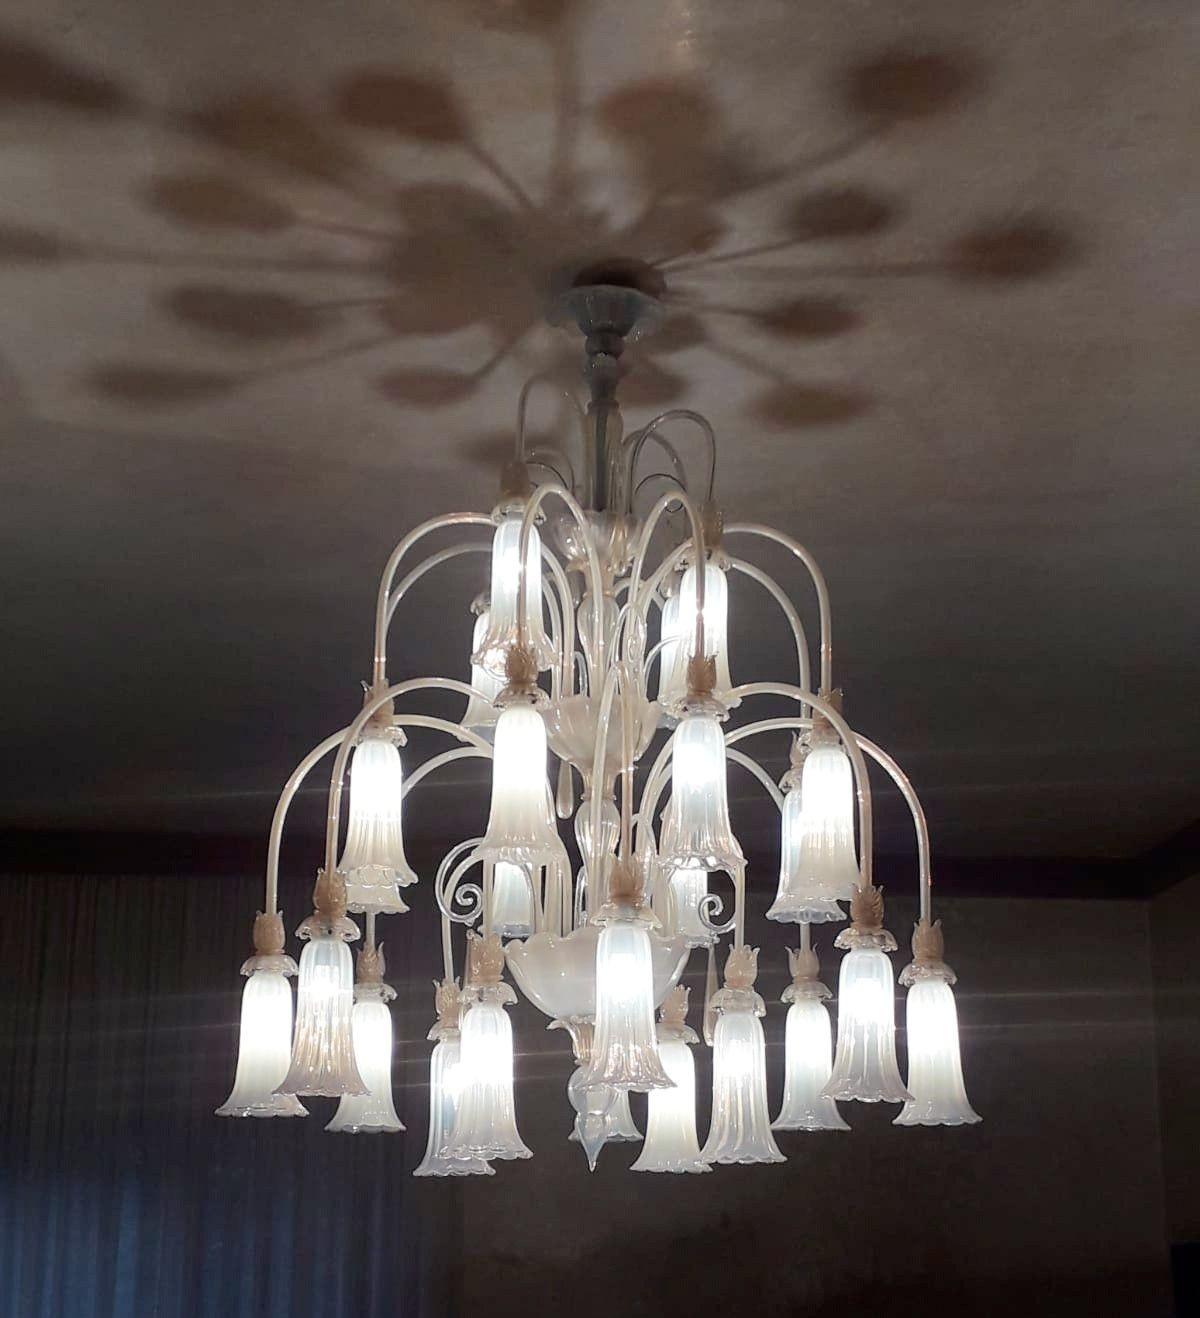 Large vintage Venetian chandelier with opaline Murano glass and decorative elements; infused with gold flecks. Made in Italy, c. 1950's.
*Rewired to fit US lighting standards.
Dimensions:
55